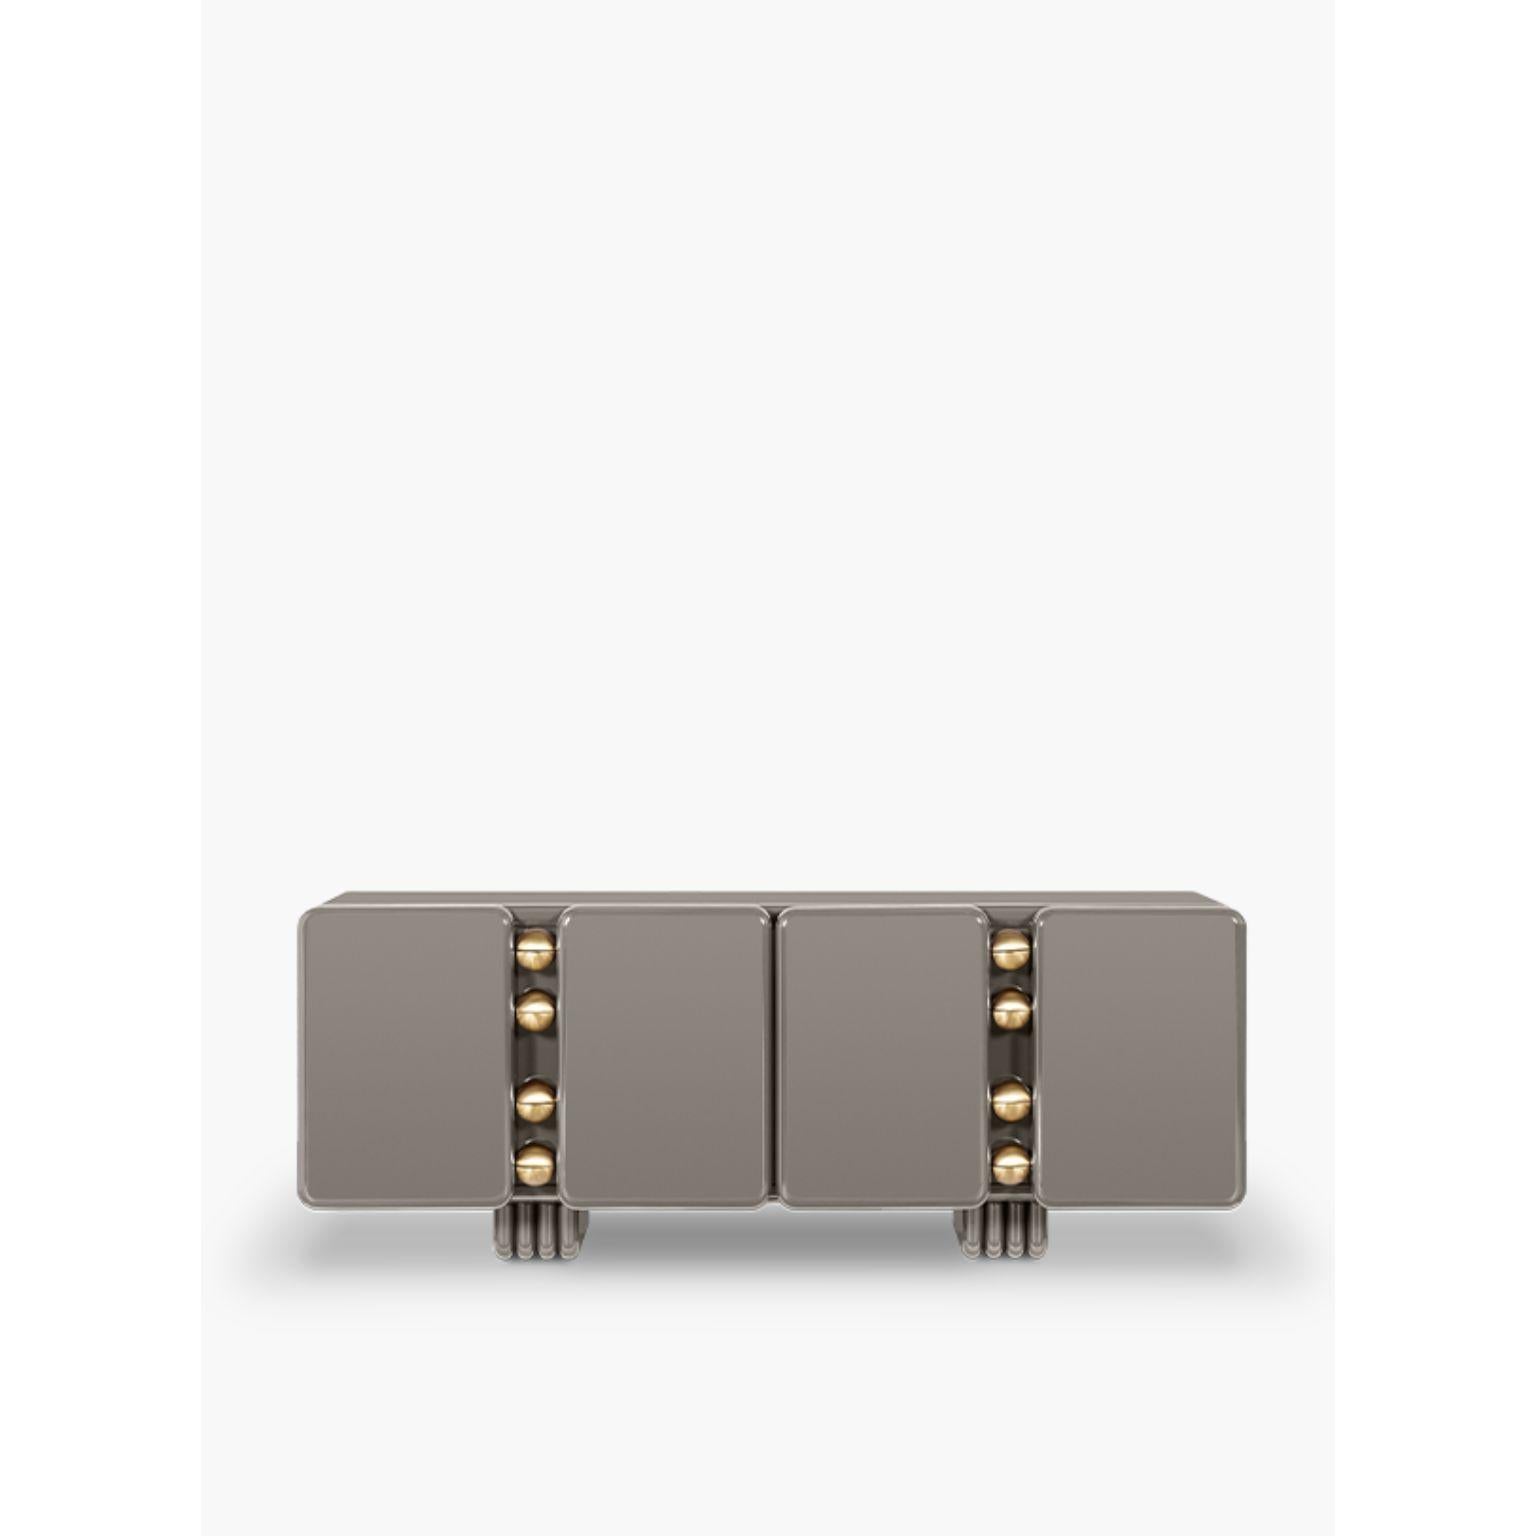 Monolithic sideboard, Royal Stranger
Dimensions: W 220 x D 70 x H 84 cm
Materials: Body cherry grey lacquered with matte finish
 Door hinges brushed brass
Weight: 253 kg 

Finish options
Body available in all NCS/RAL colors with matte or